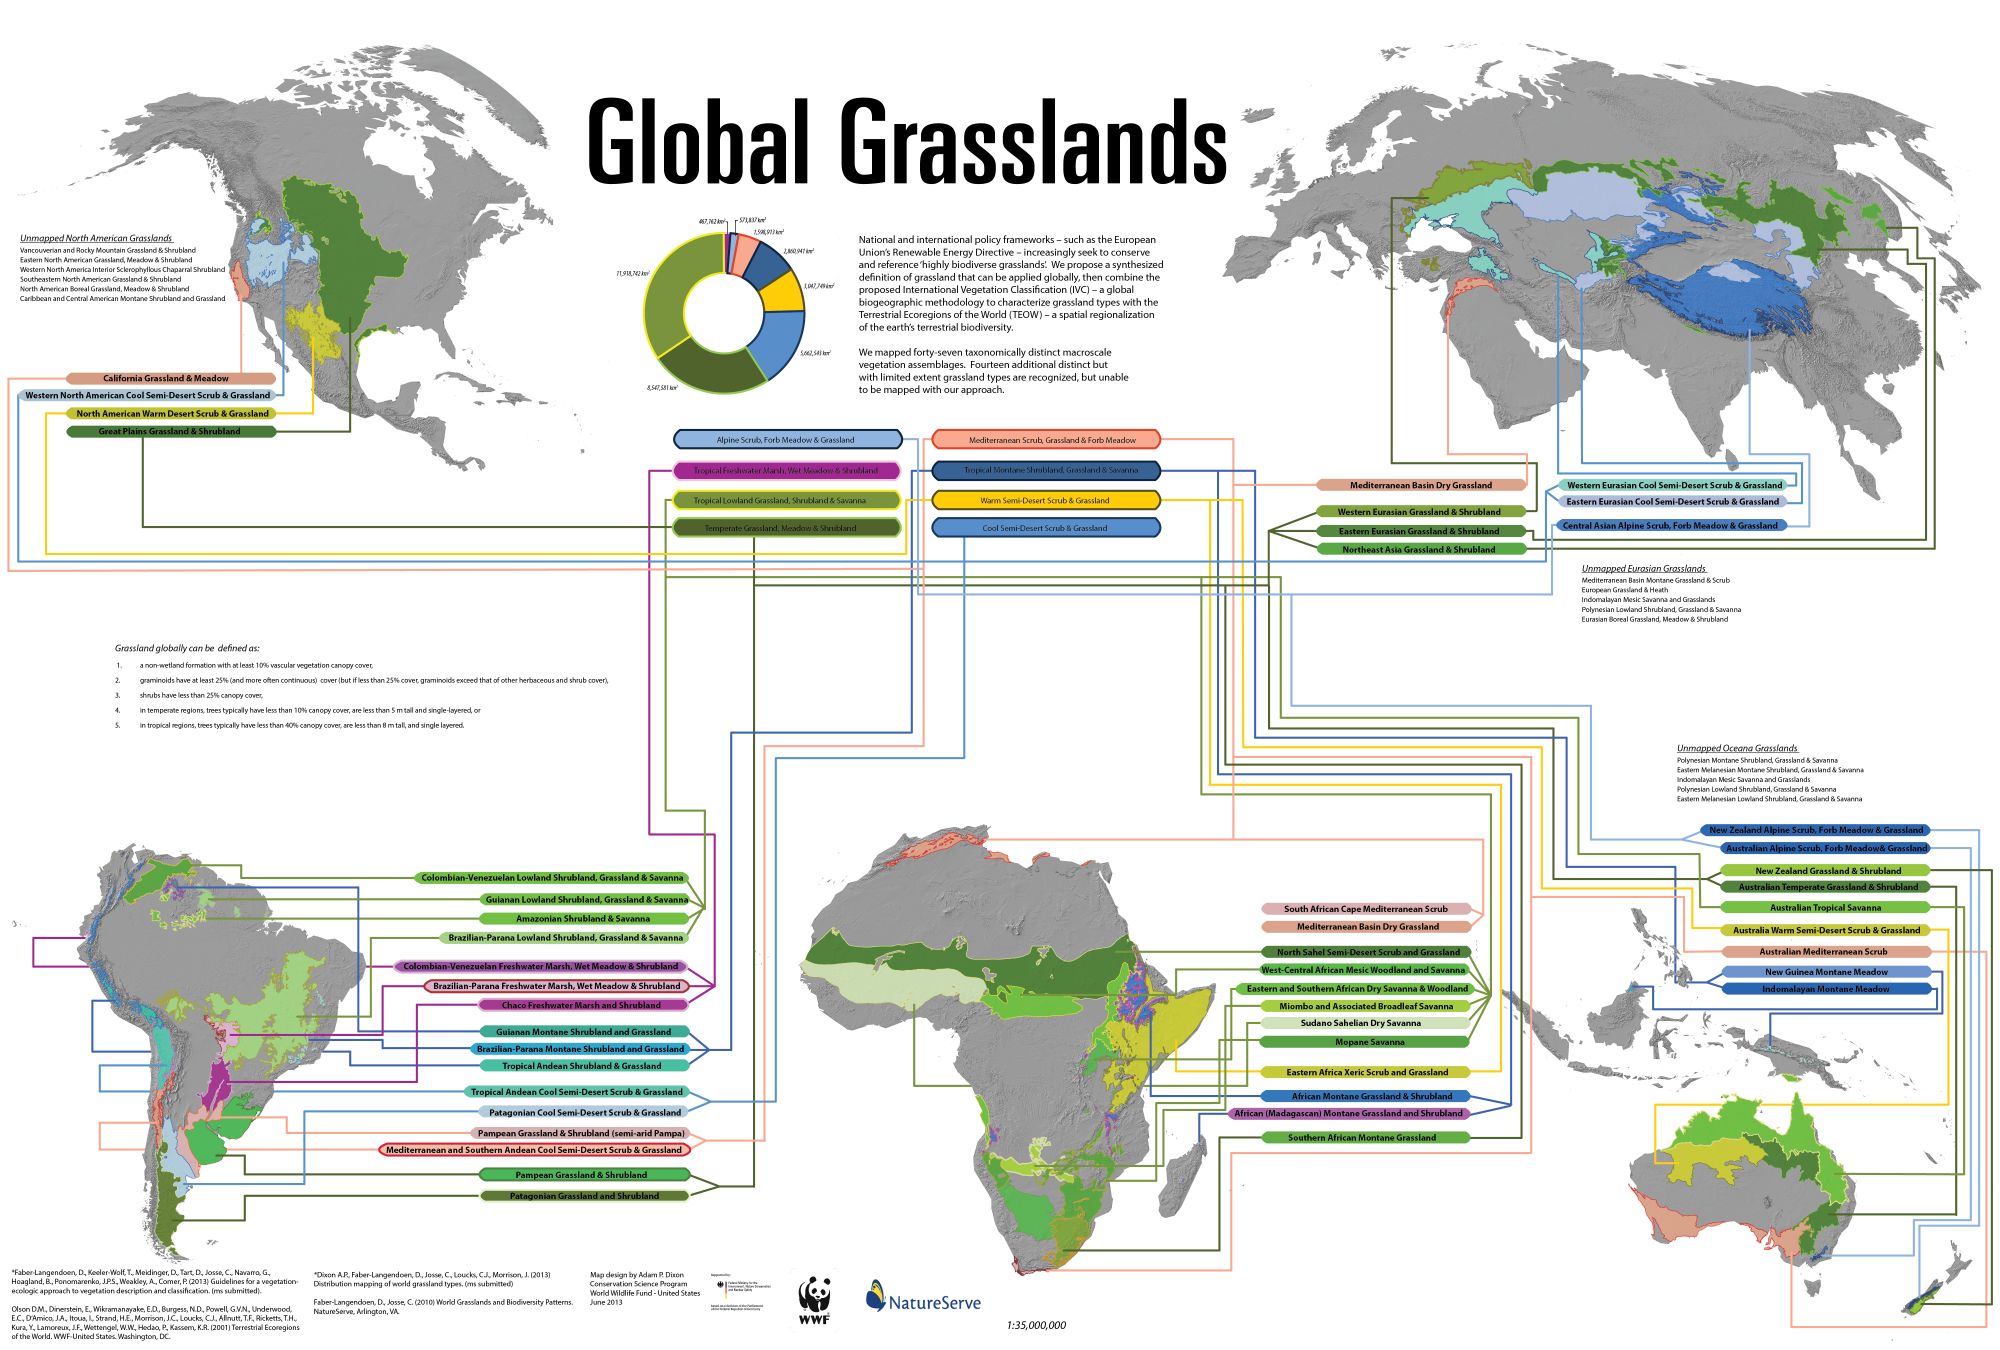 3rd Place: World Wildlife Fund and NatureServe collaborated on this map of global grasslands. The map describes every major grassland community across the world.